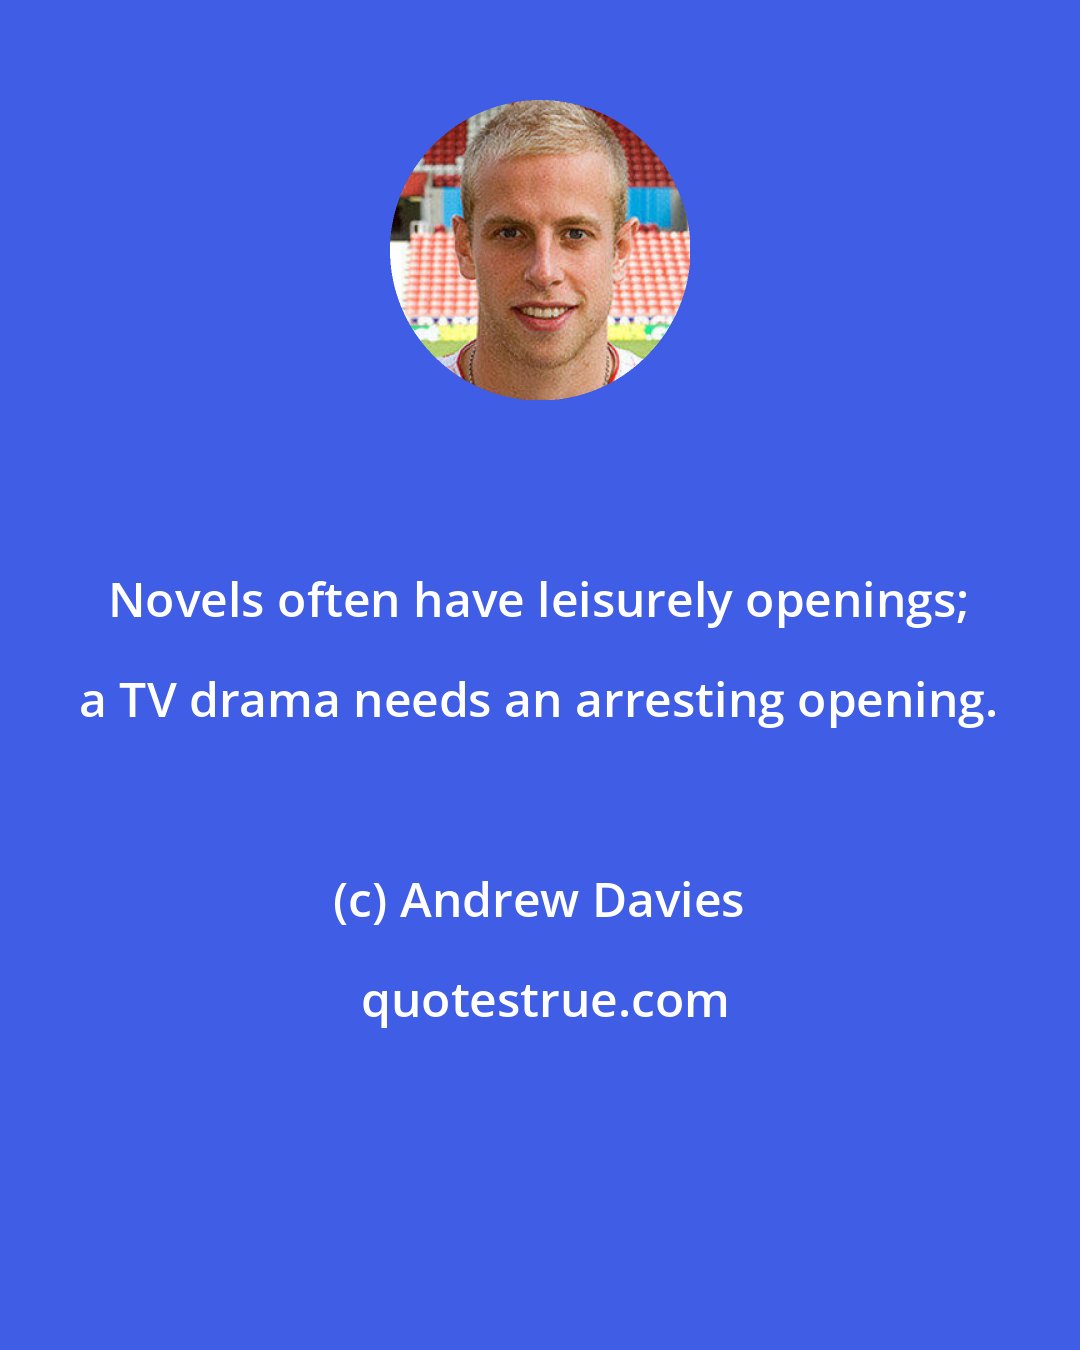 Andrew Davies: Novels often have leisurely openings; a TV drama needs an arresting opening.